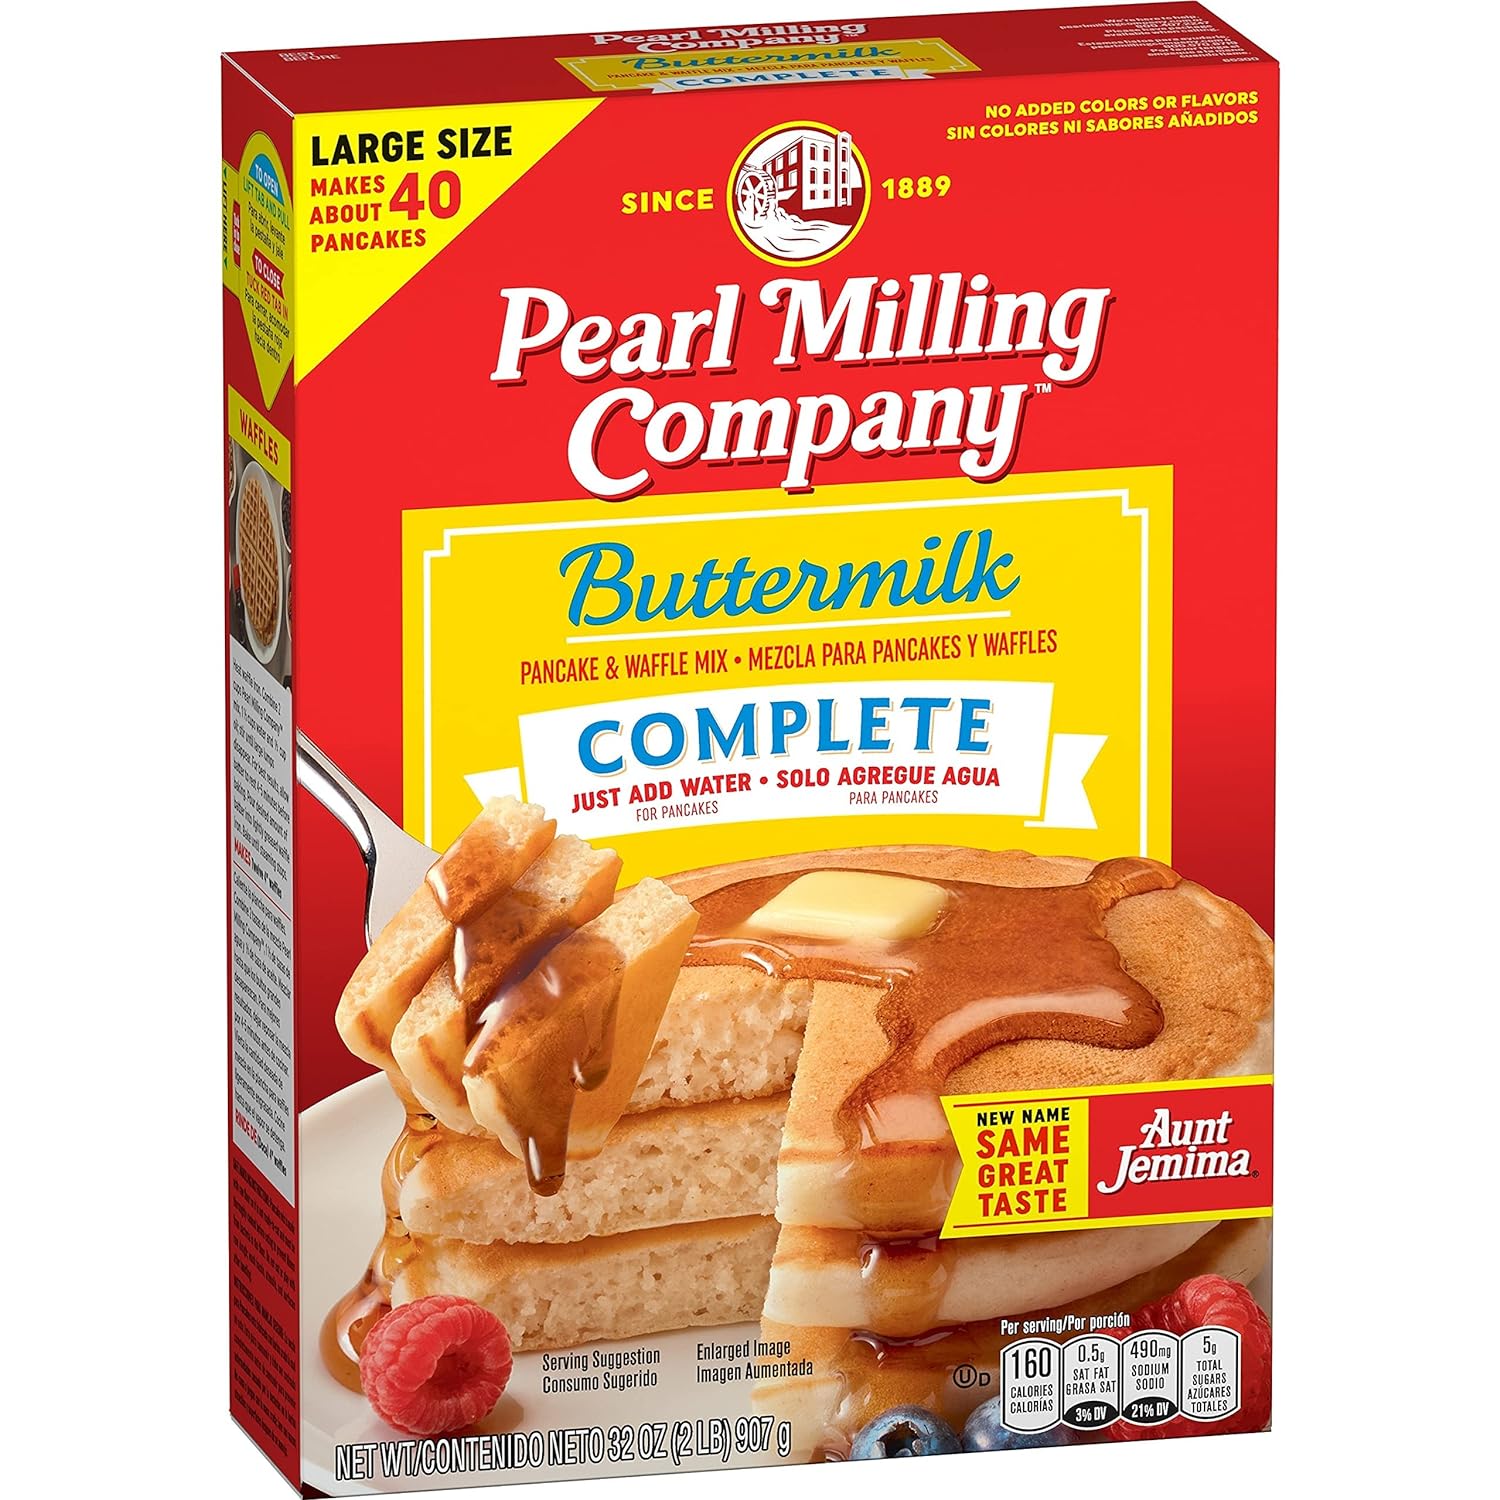 Pearl Milling Company Buttermilk Complete Mix, 2 Pound(Pack of 1)